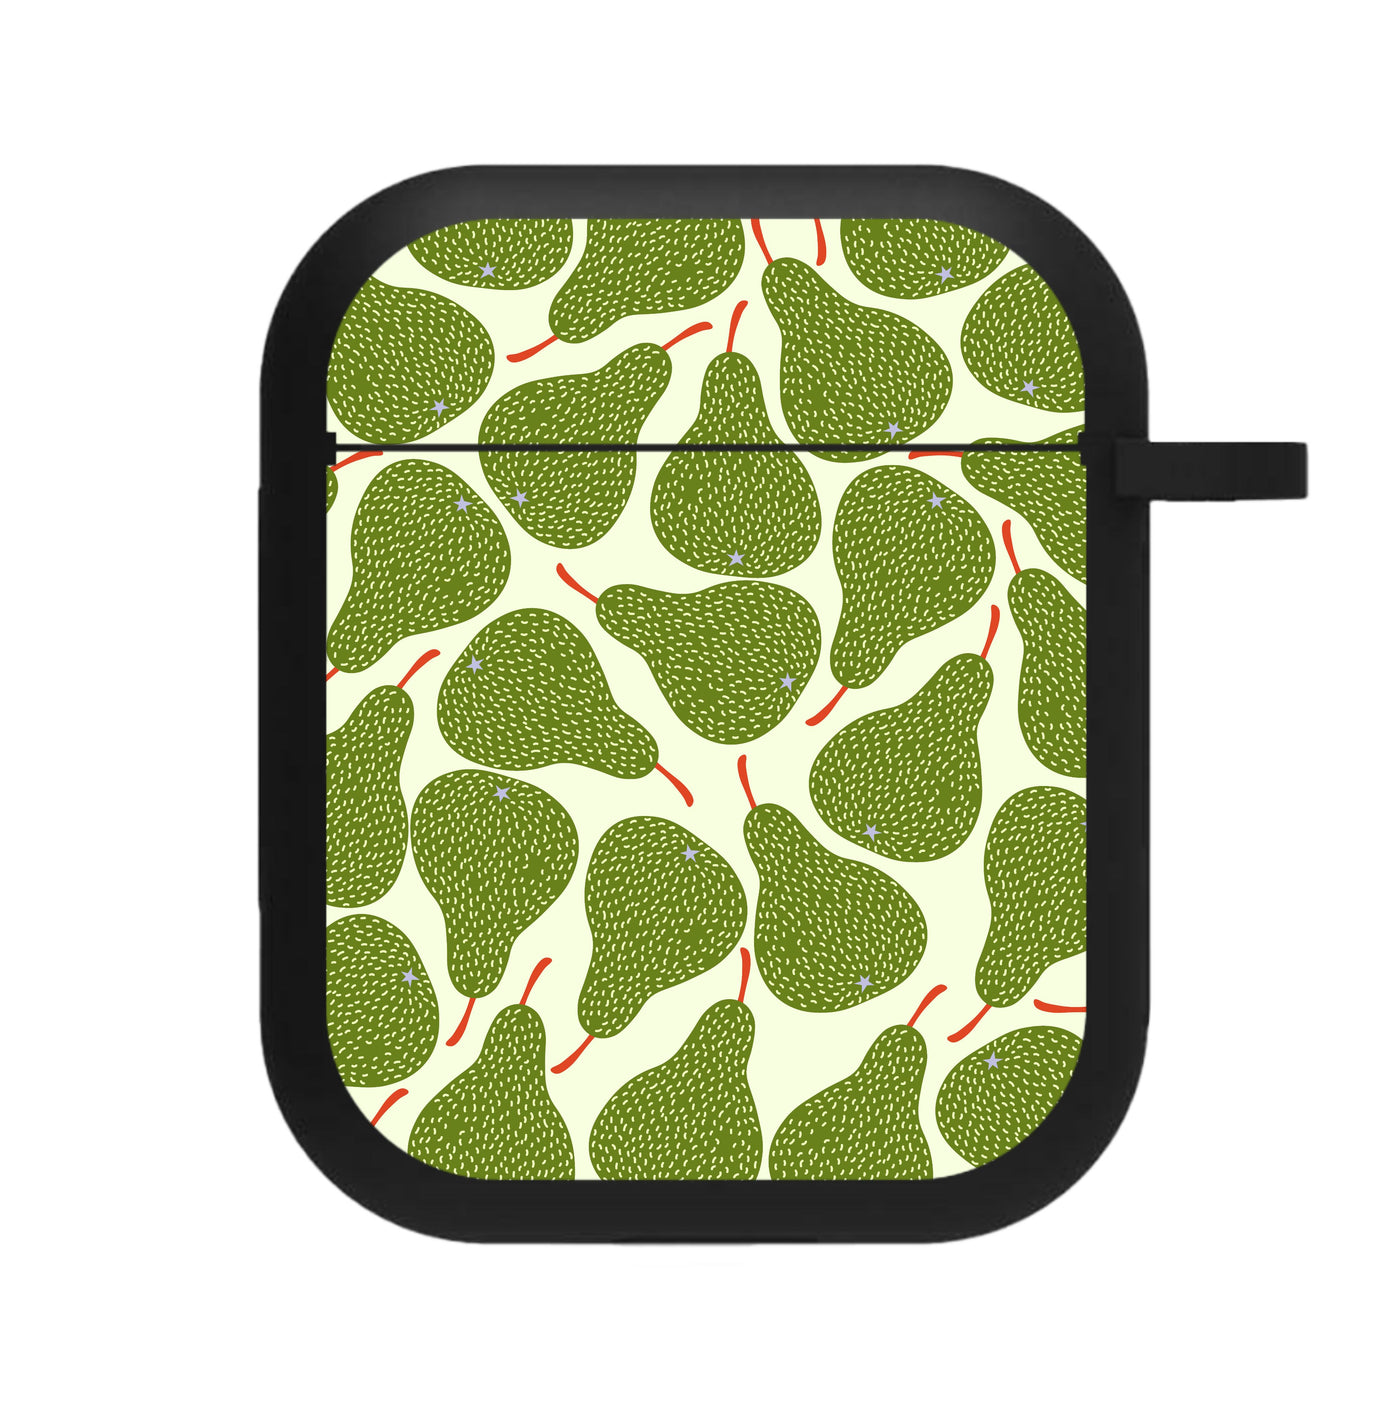 Pears - Fruit Patterns AirPods Case